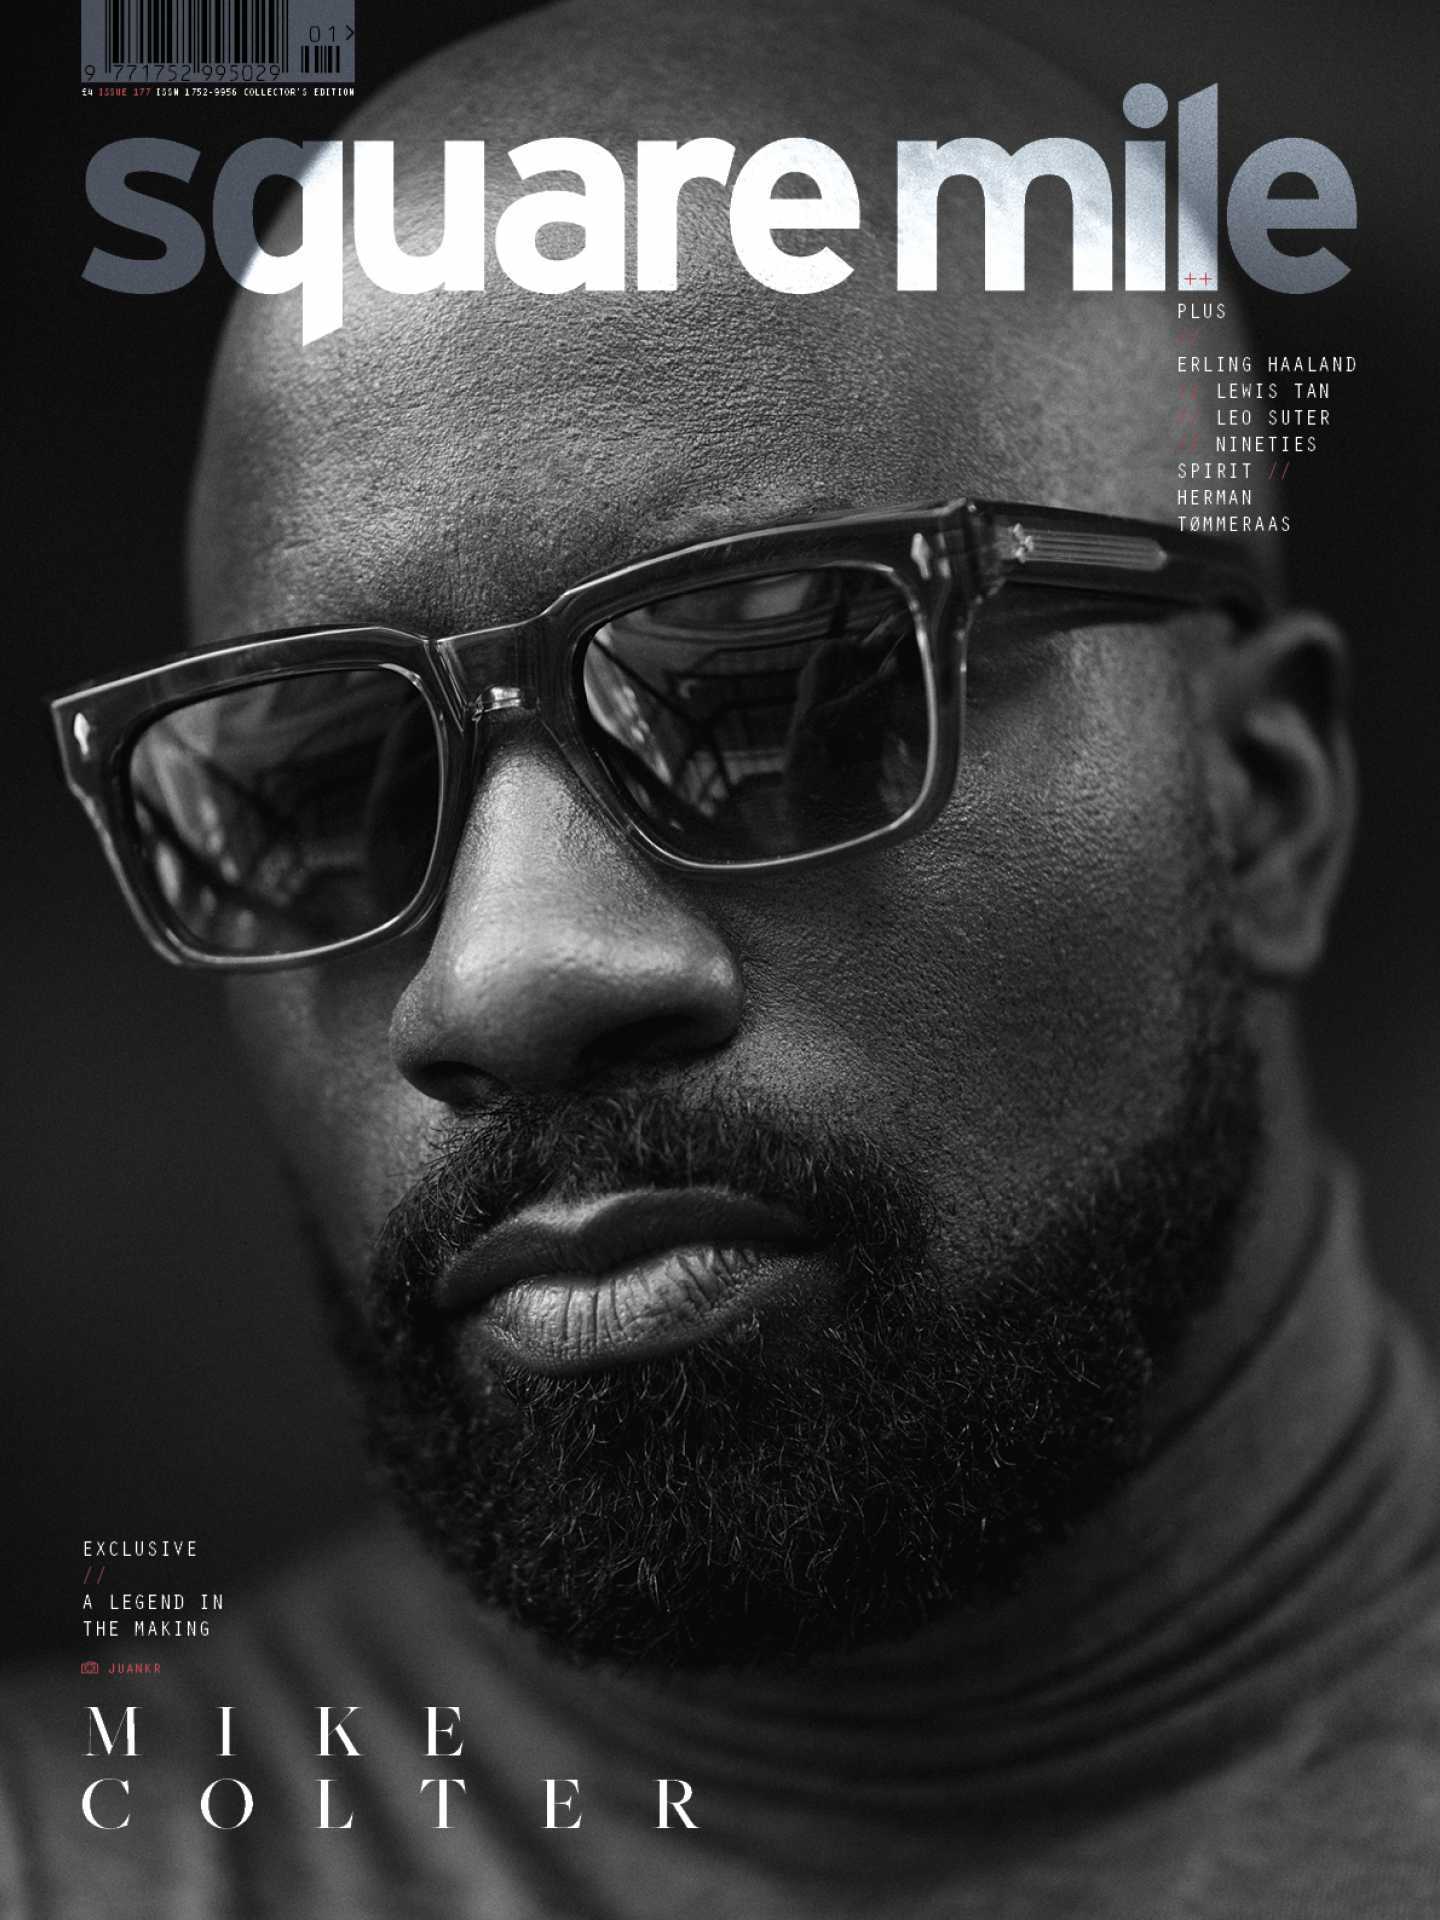 Mike Colter photographed for Square Mile by Juanker